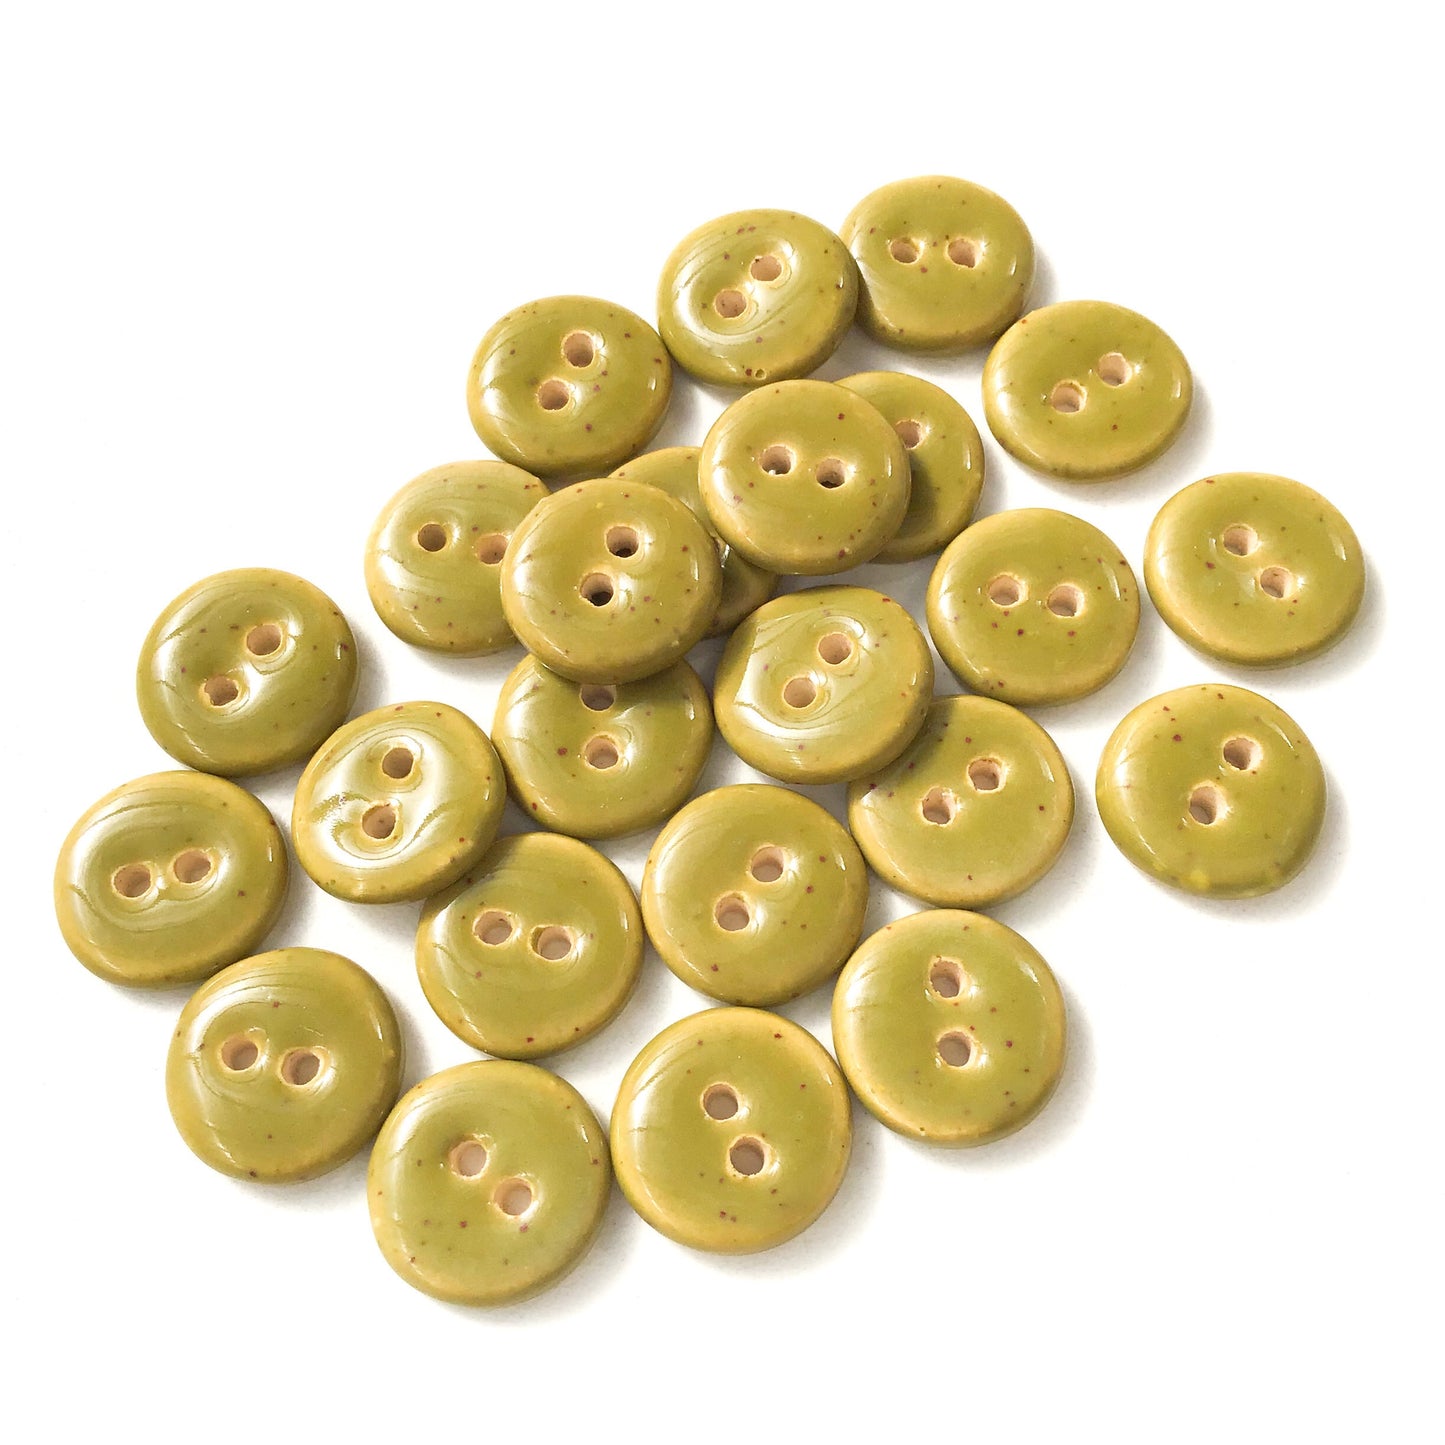 Speckled Olive Green Ceramic Buttons - Mossy Green Clay Buttons - 9/16"